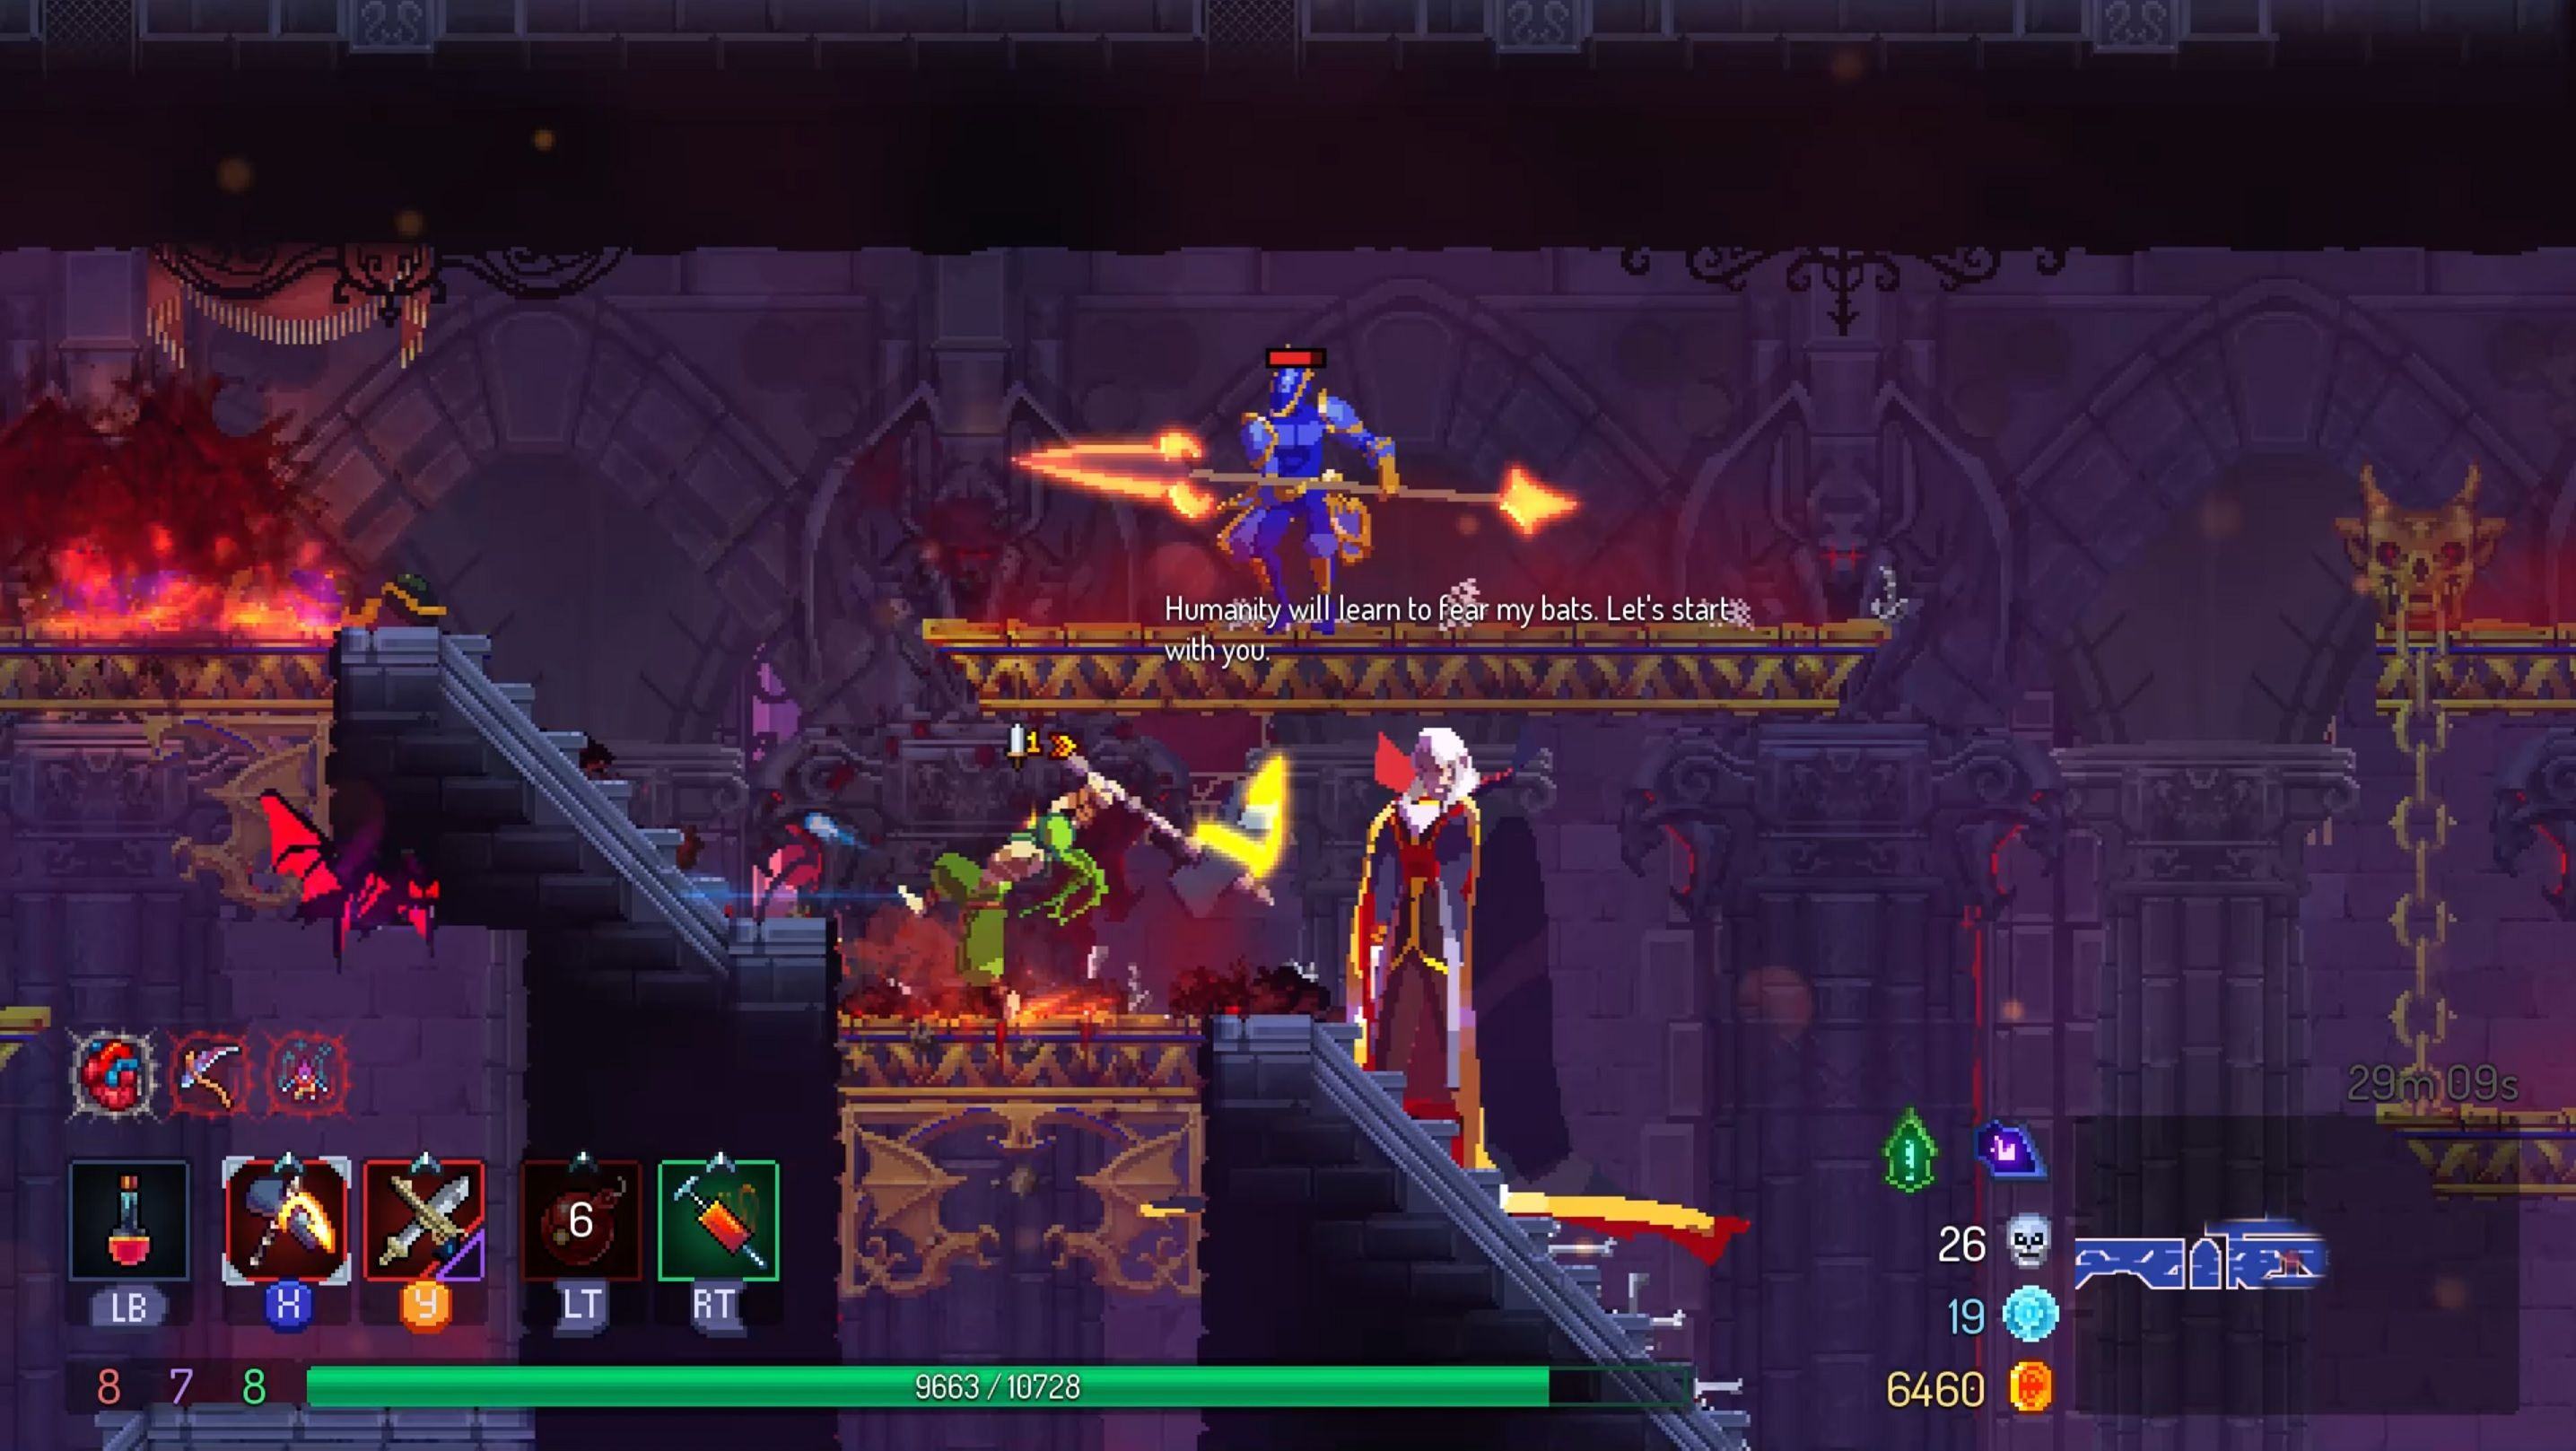 Image of dead cell character being attacked by vampires, knights and some bats on the stairs